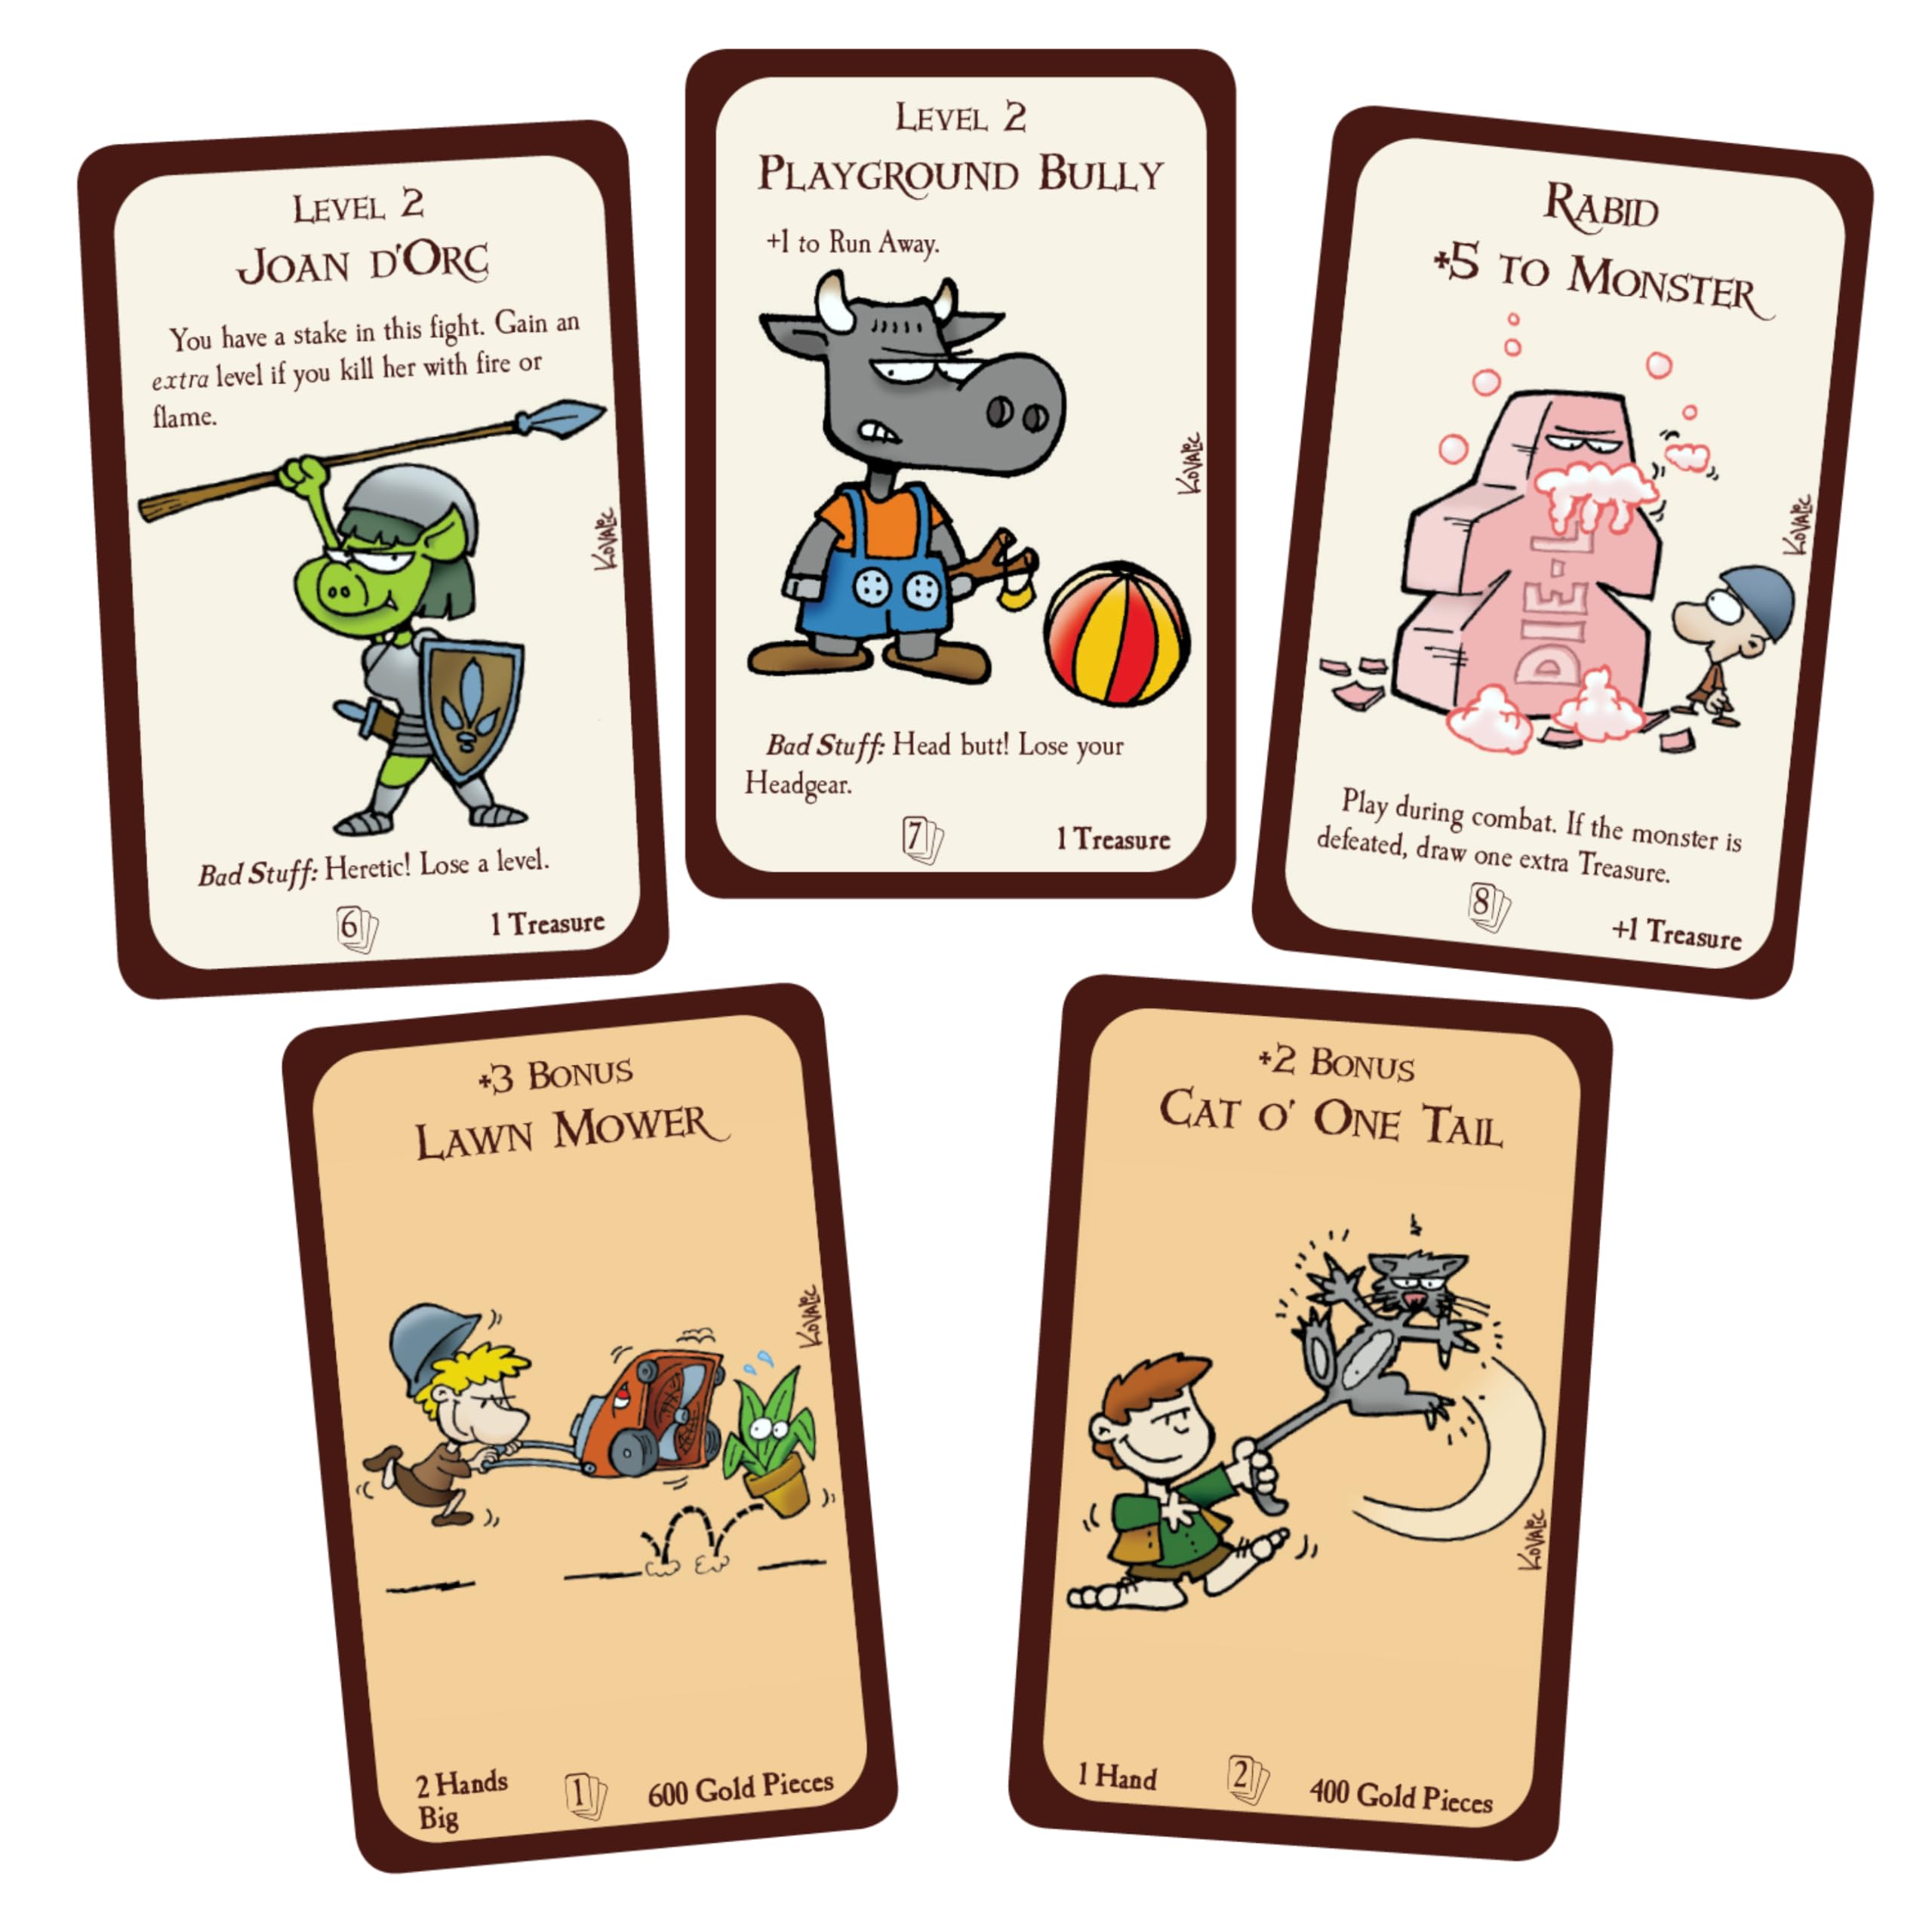 Steve Jackson Games Munchkin Marked for Death Strategy Game